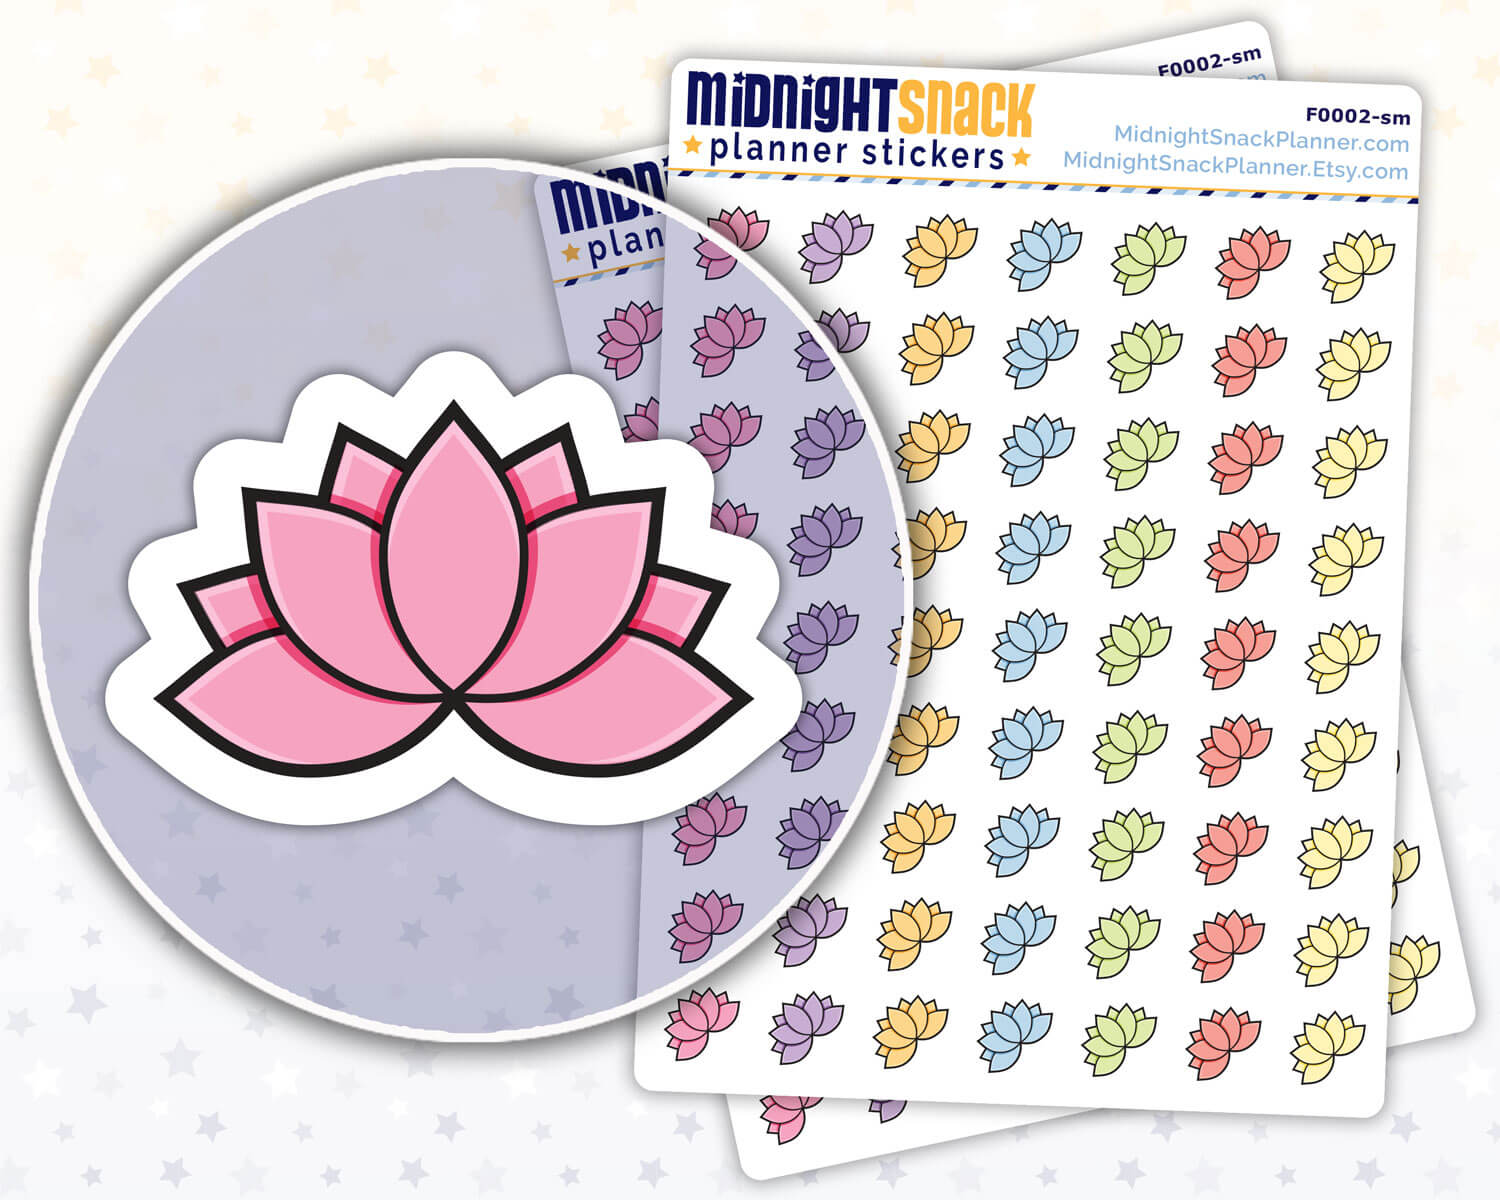 Small Lotus Flower Yoga Icon: Meditation, Health and Fitness Planner Stickers Midnight Snack Planner